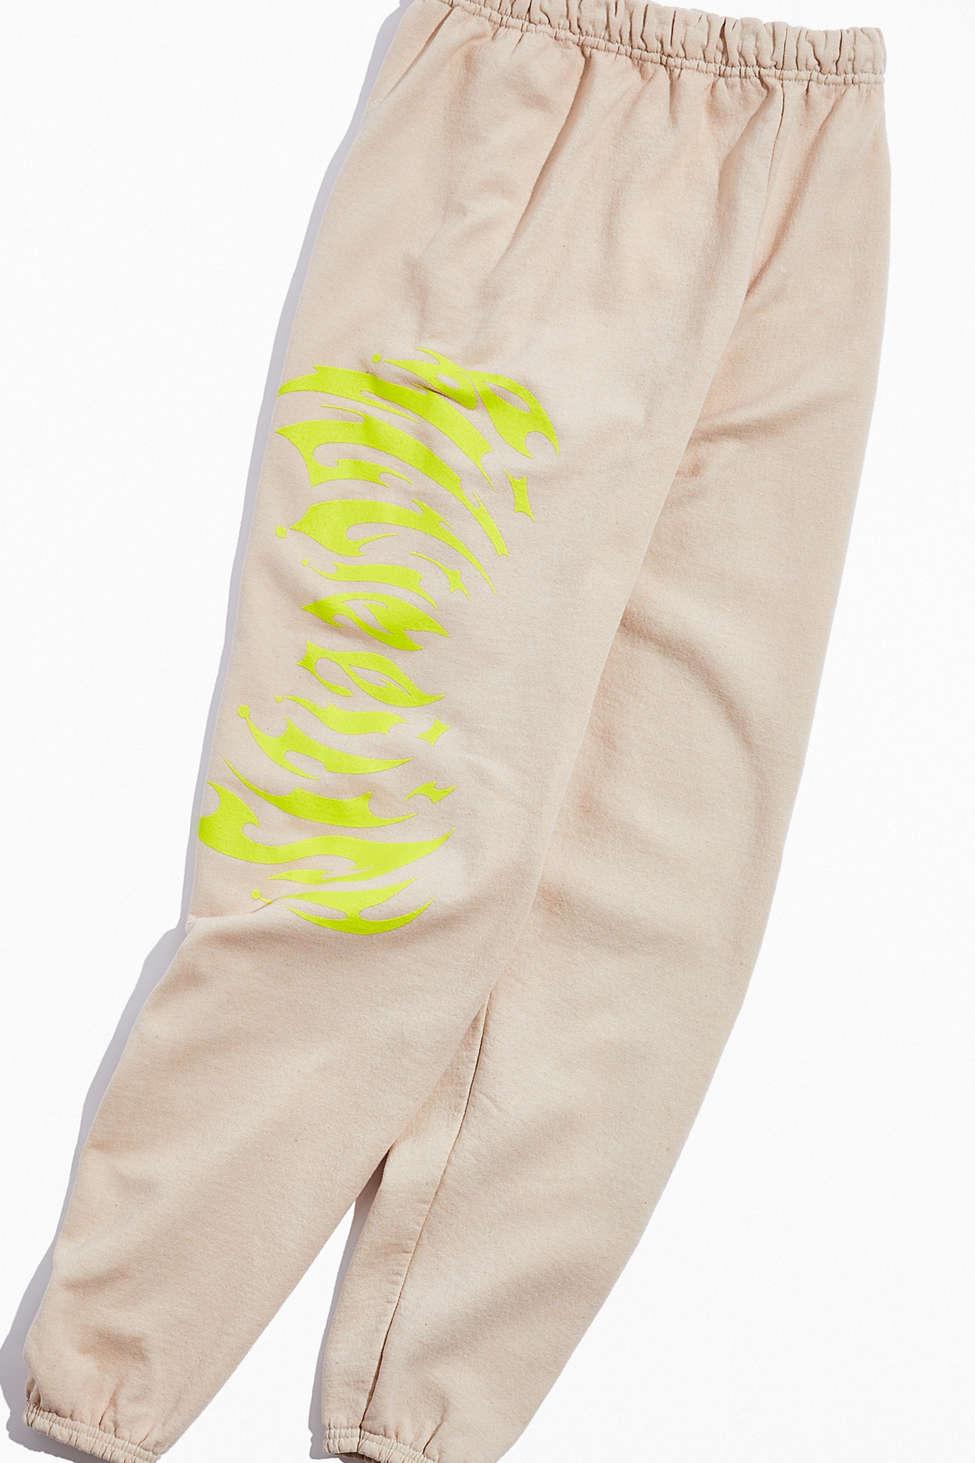 Urban Outfitters Billie Eilish Uo Exclusive Jogger Pant for Men | Lyst